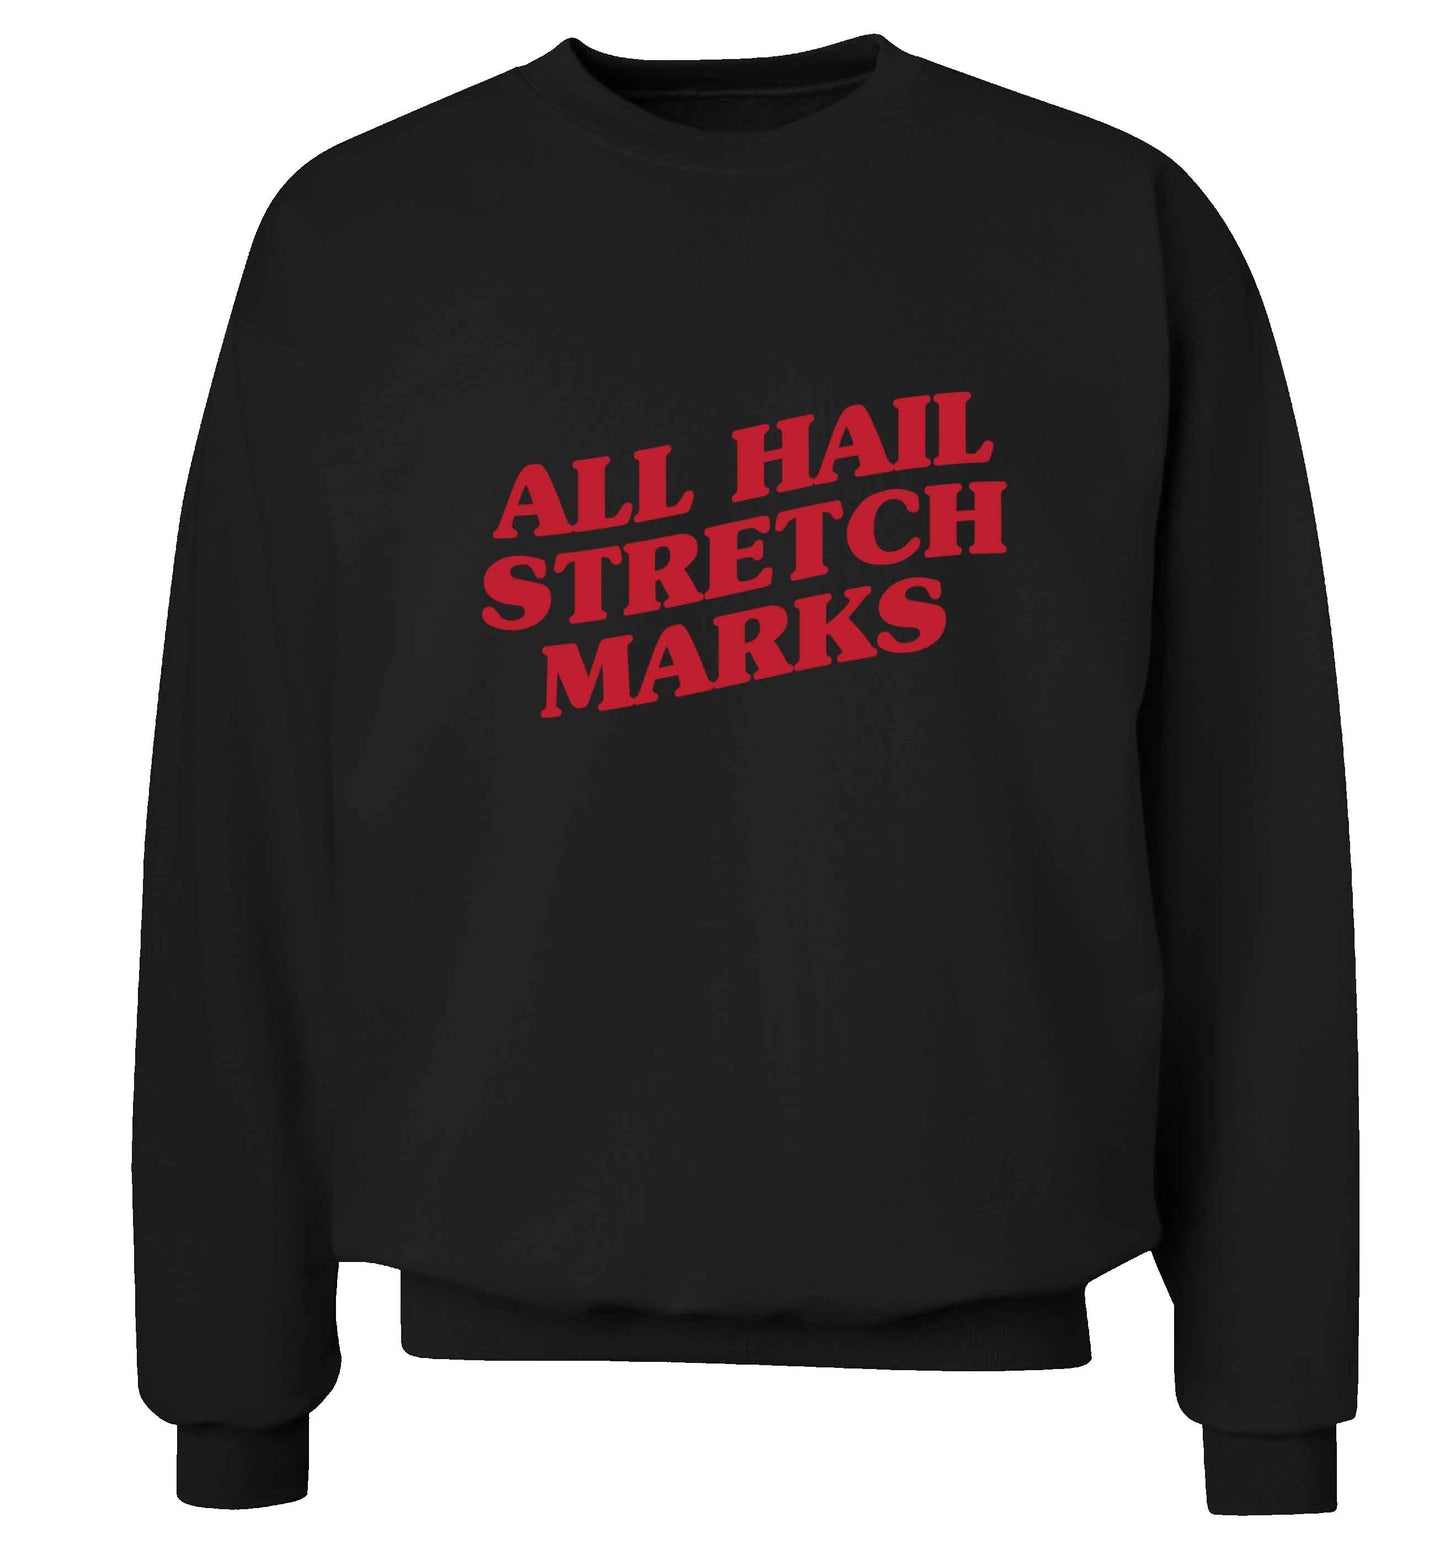 All hail stretch marks adult's unisex black sweater 2XL